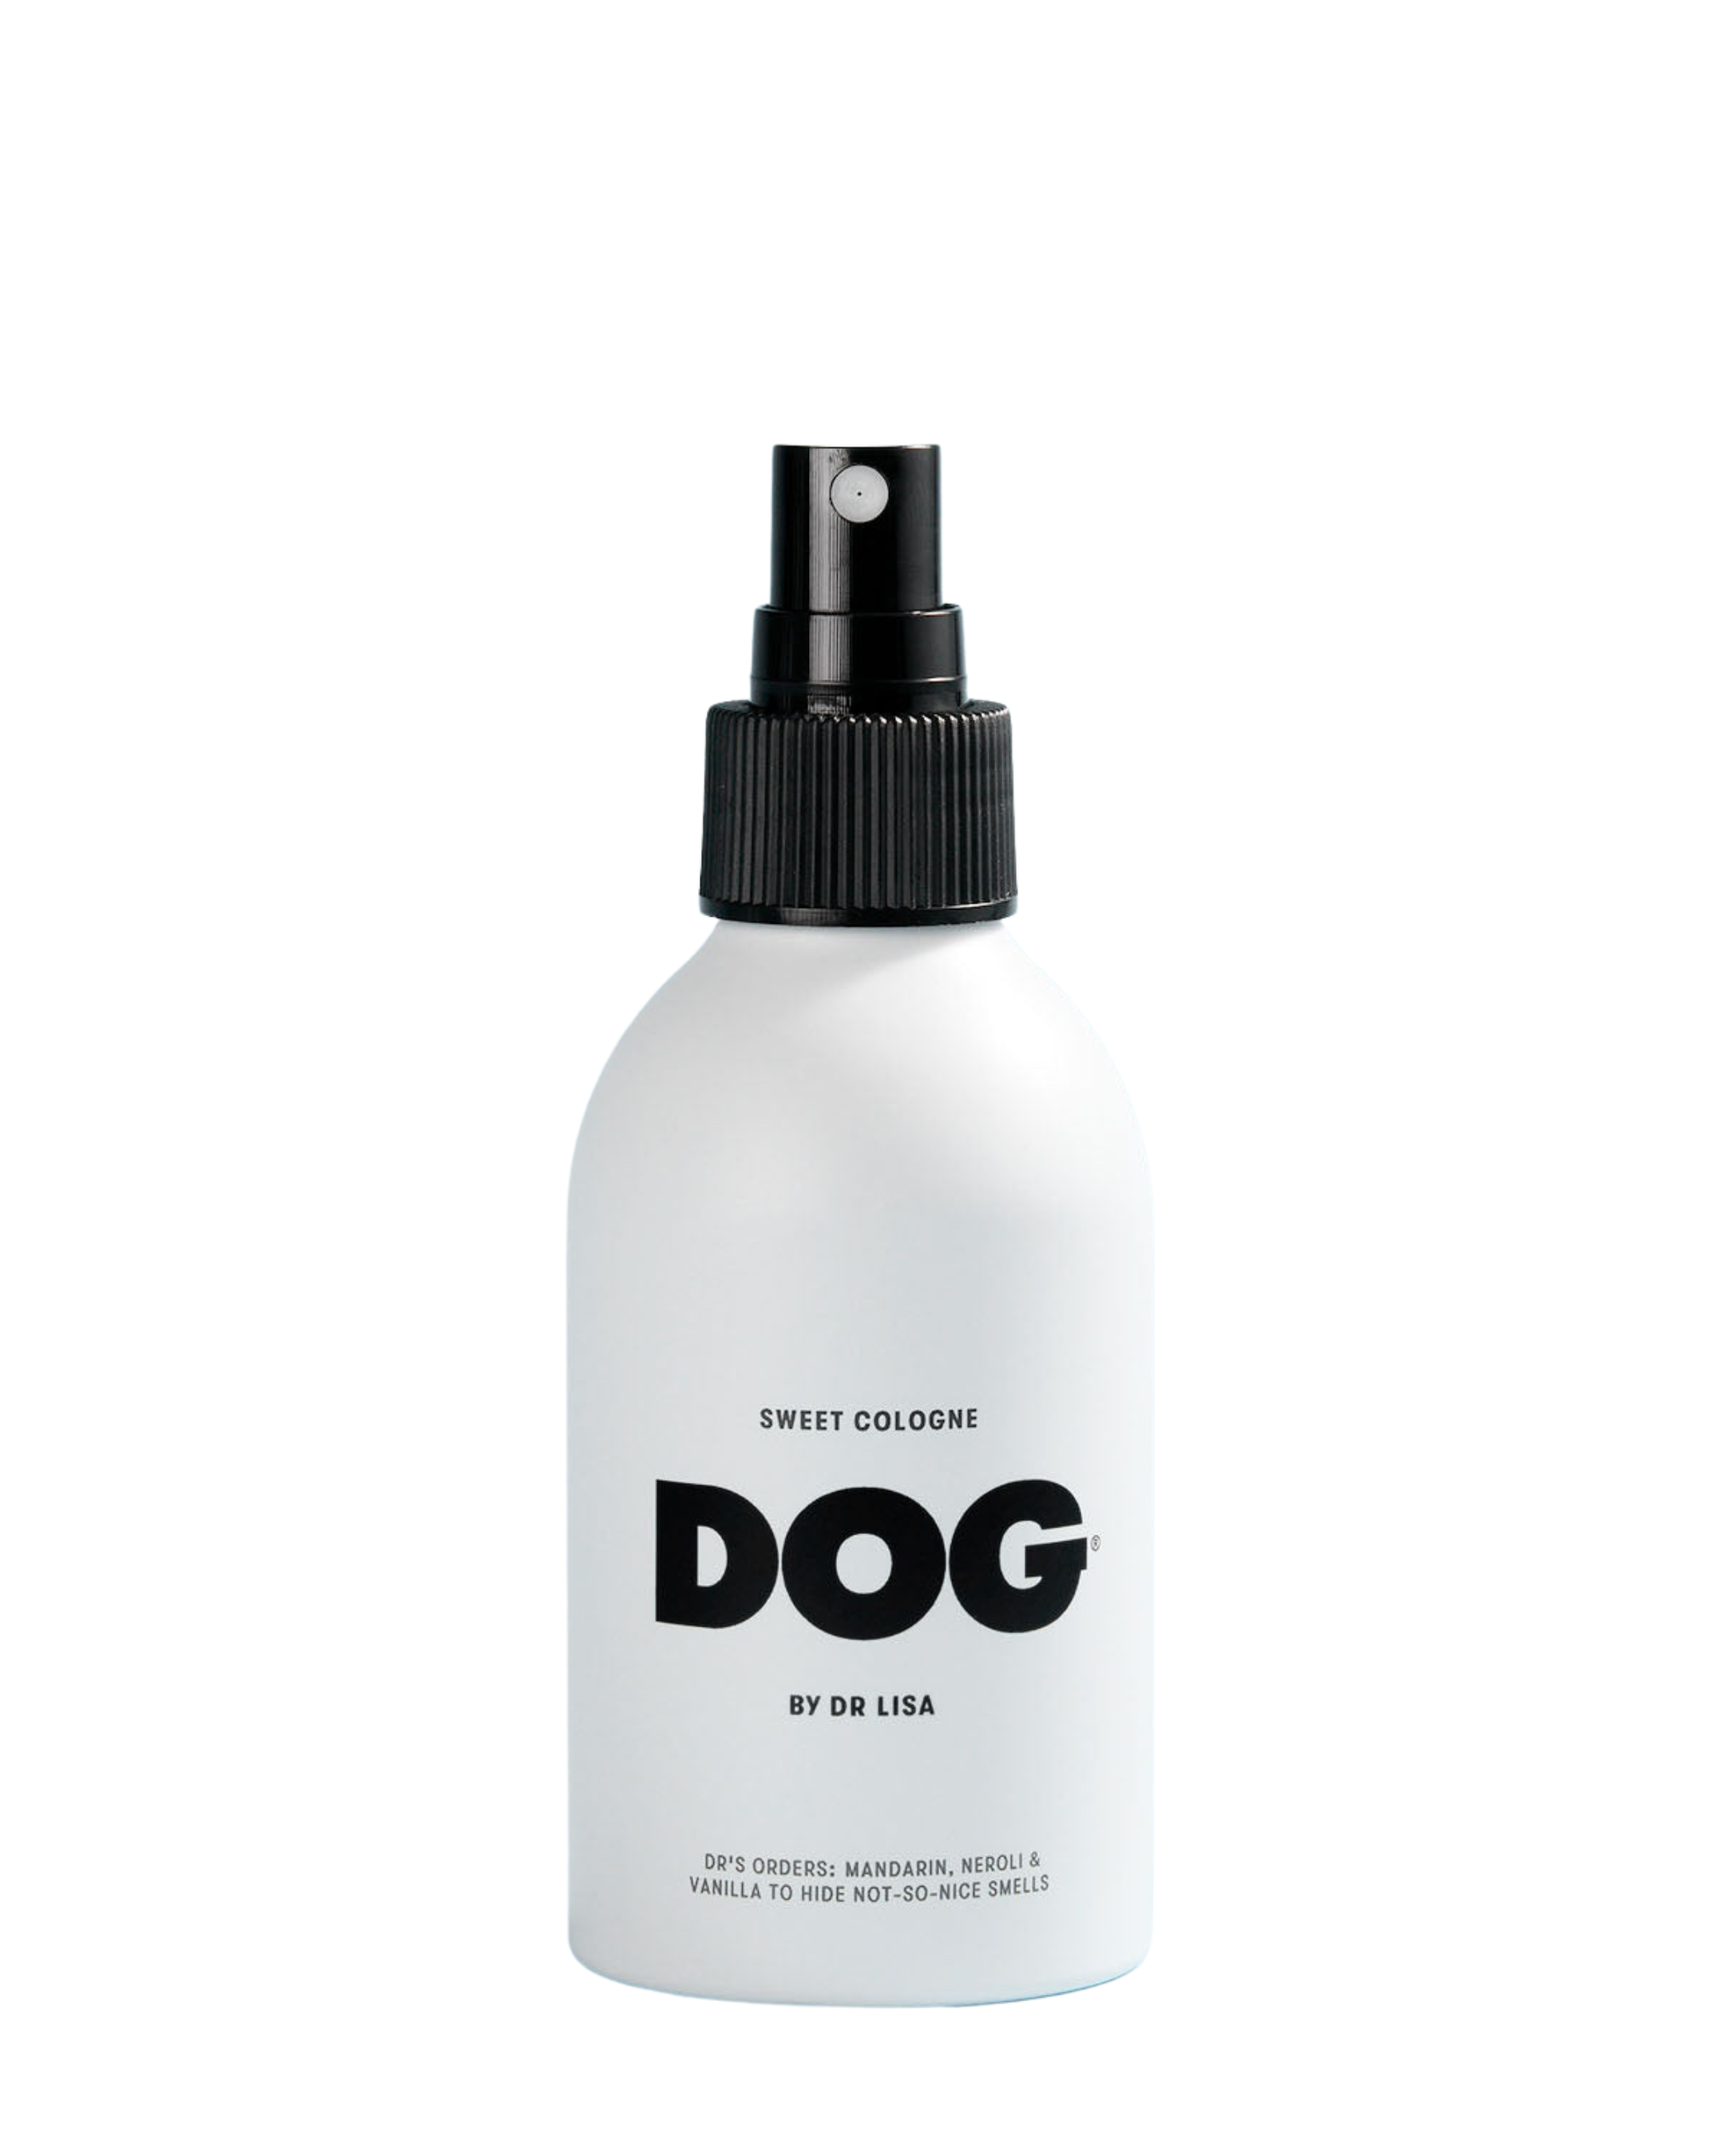 DOG By Dr Lisa Cologne Sweet